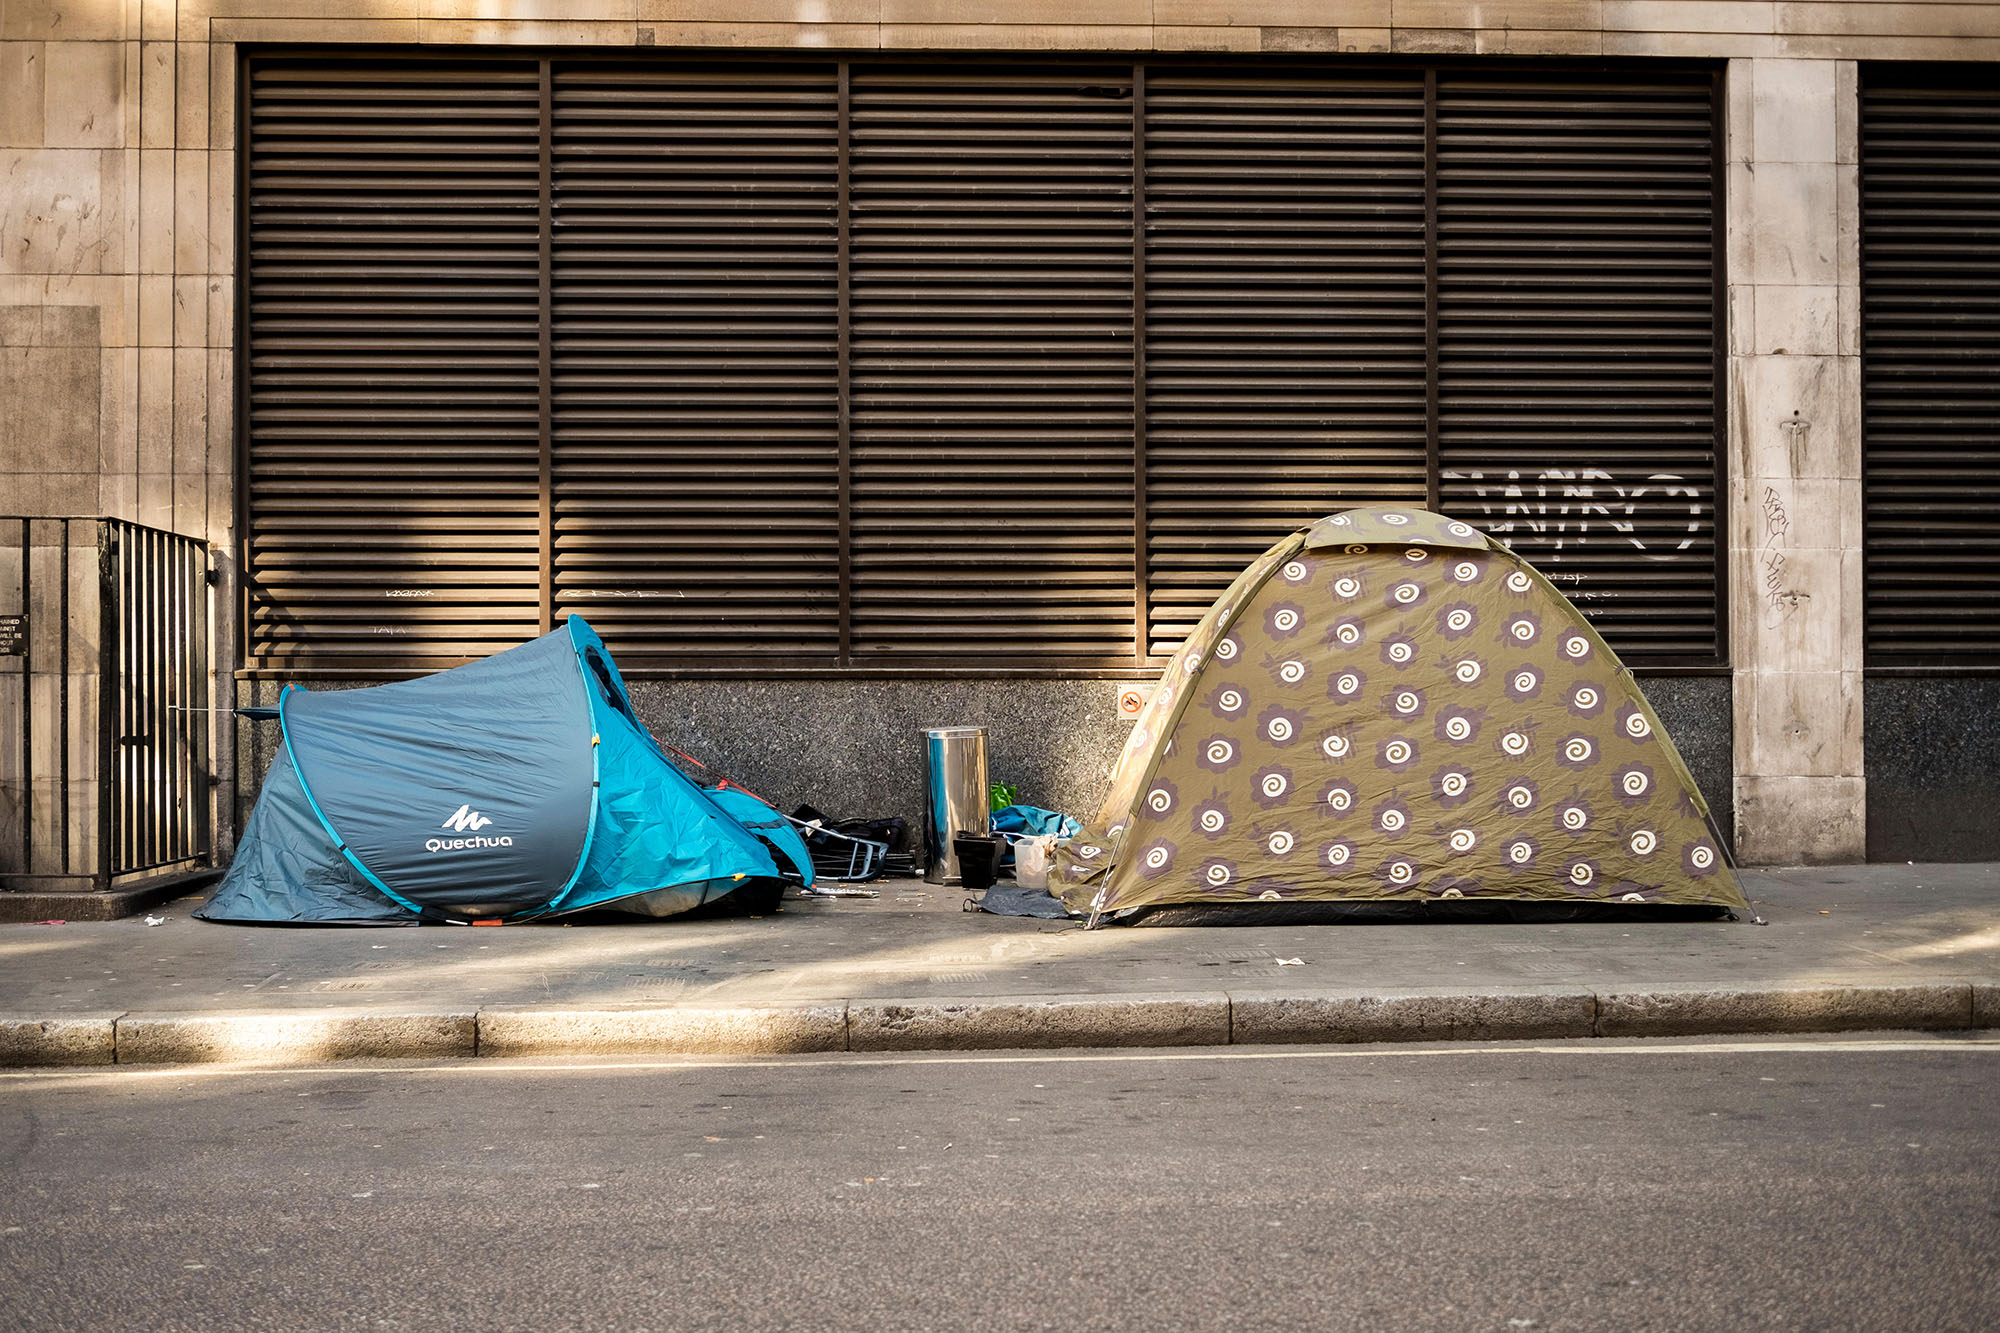 homeless tents in London